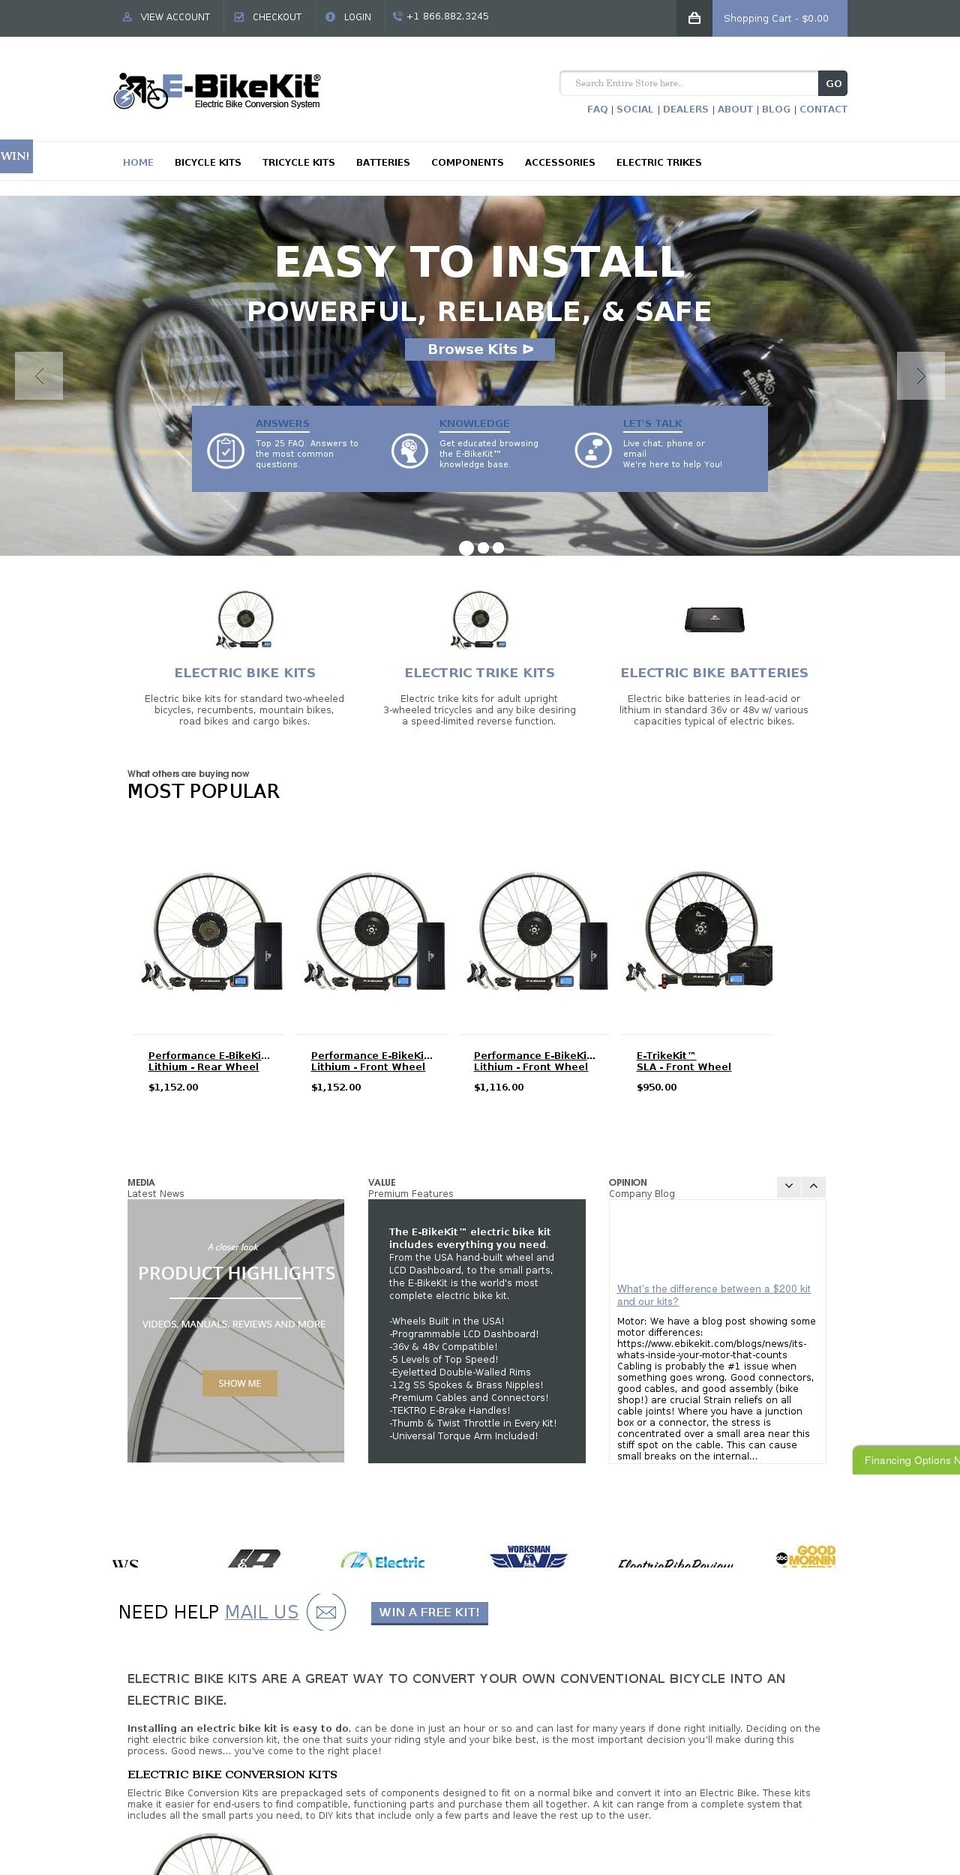 New Team Page: 10-Mar-17 Shopify theme site example e-bikekit.cn